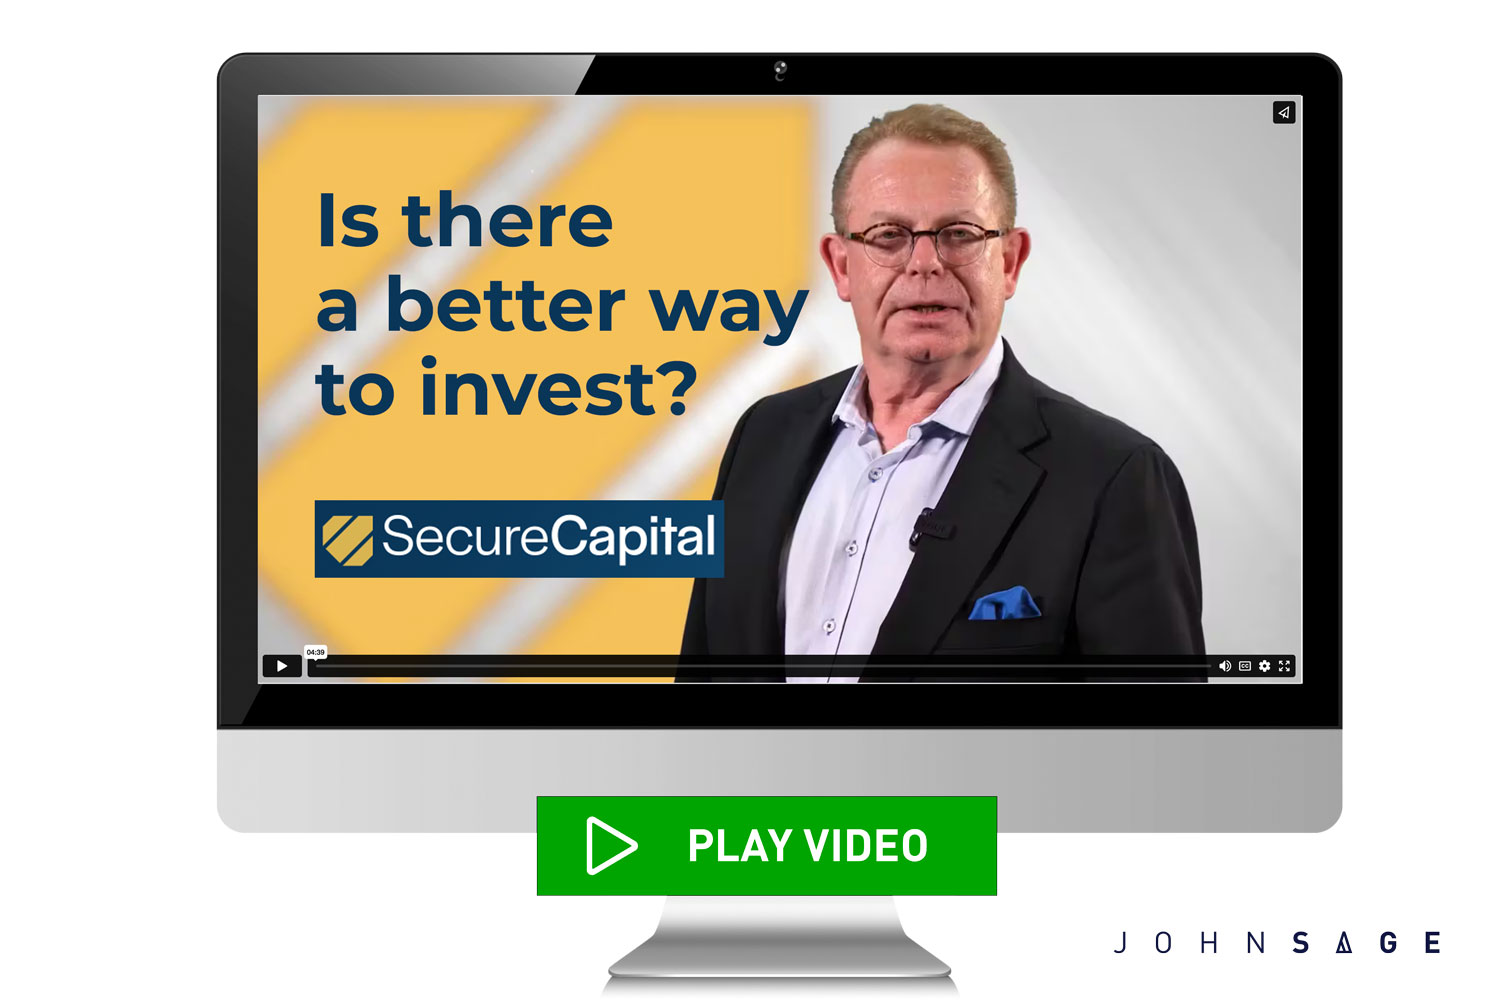 Watch video produced by John Sage. Secure Capital: Is there a better way to invest?